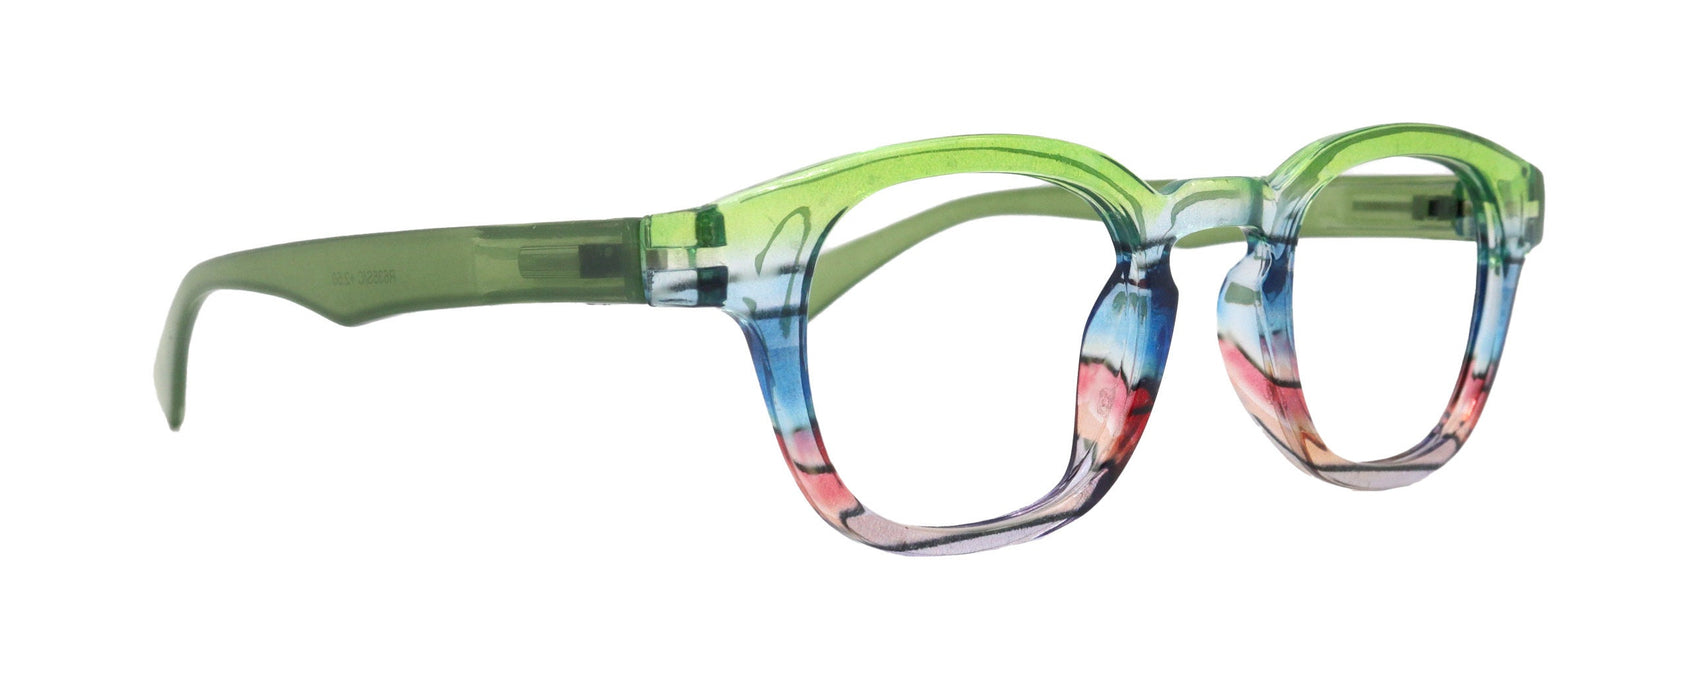 Premium Reading Glasses High End Readers +1.25 .. +4.00 (Green Transparent) Round Optical Frames. NY Fifth Avenue.